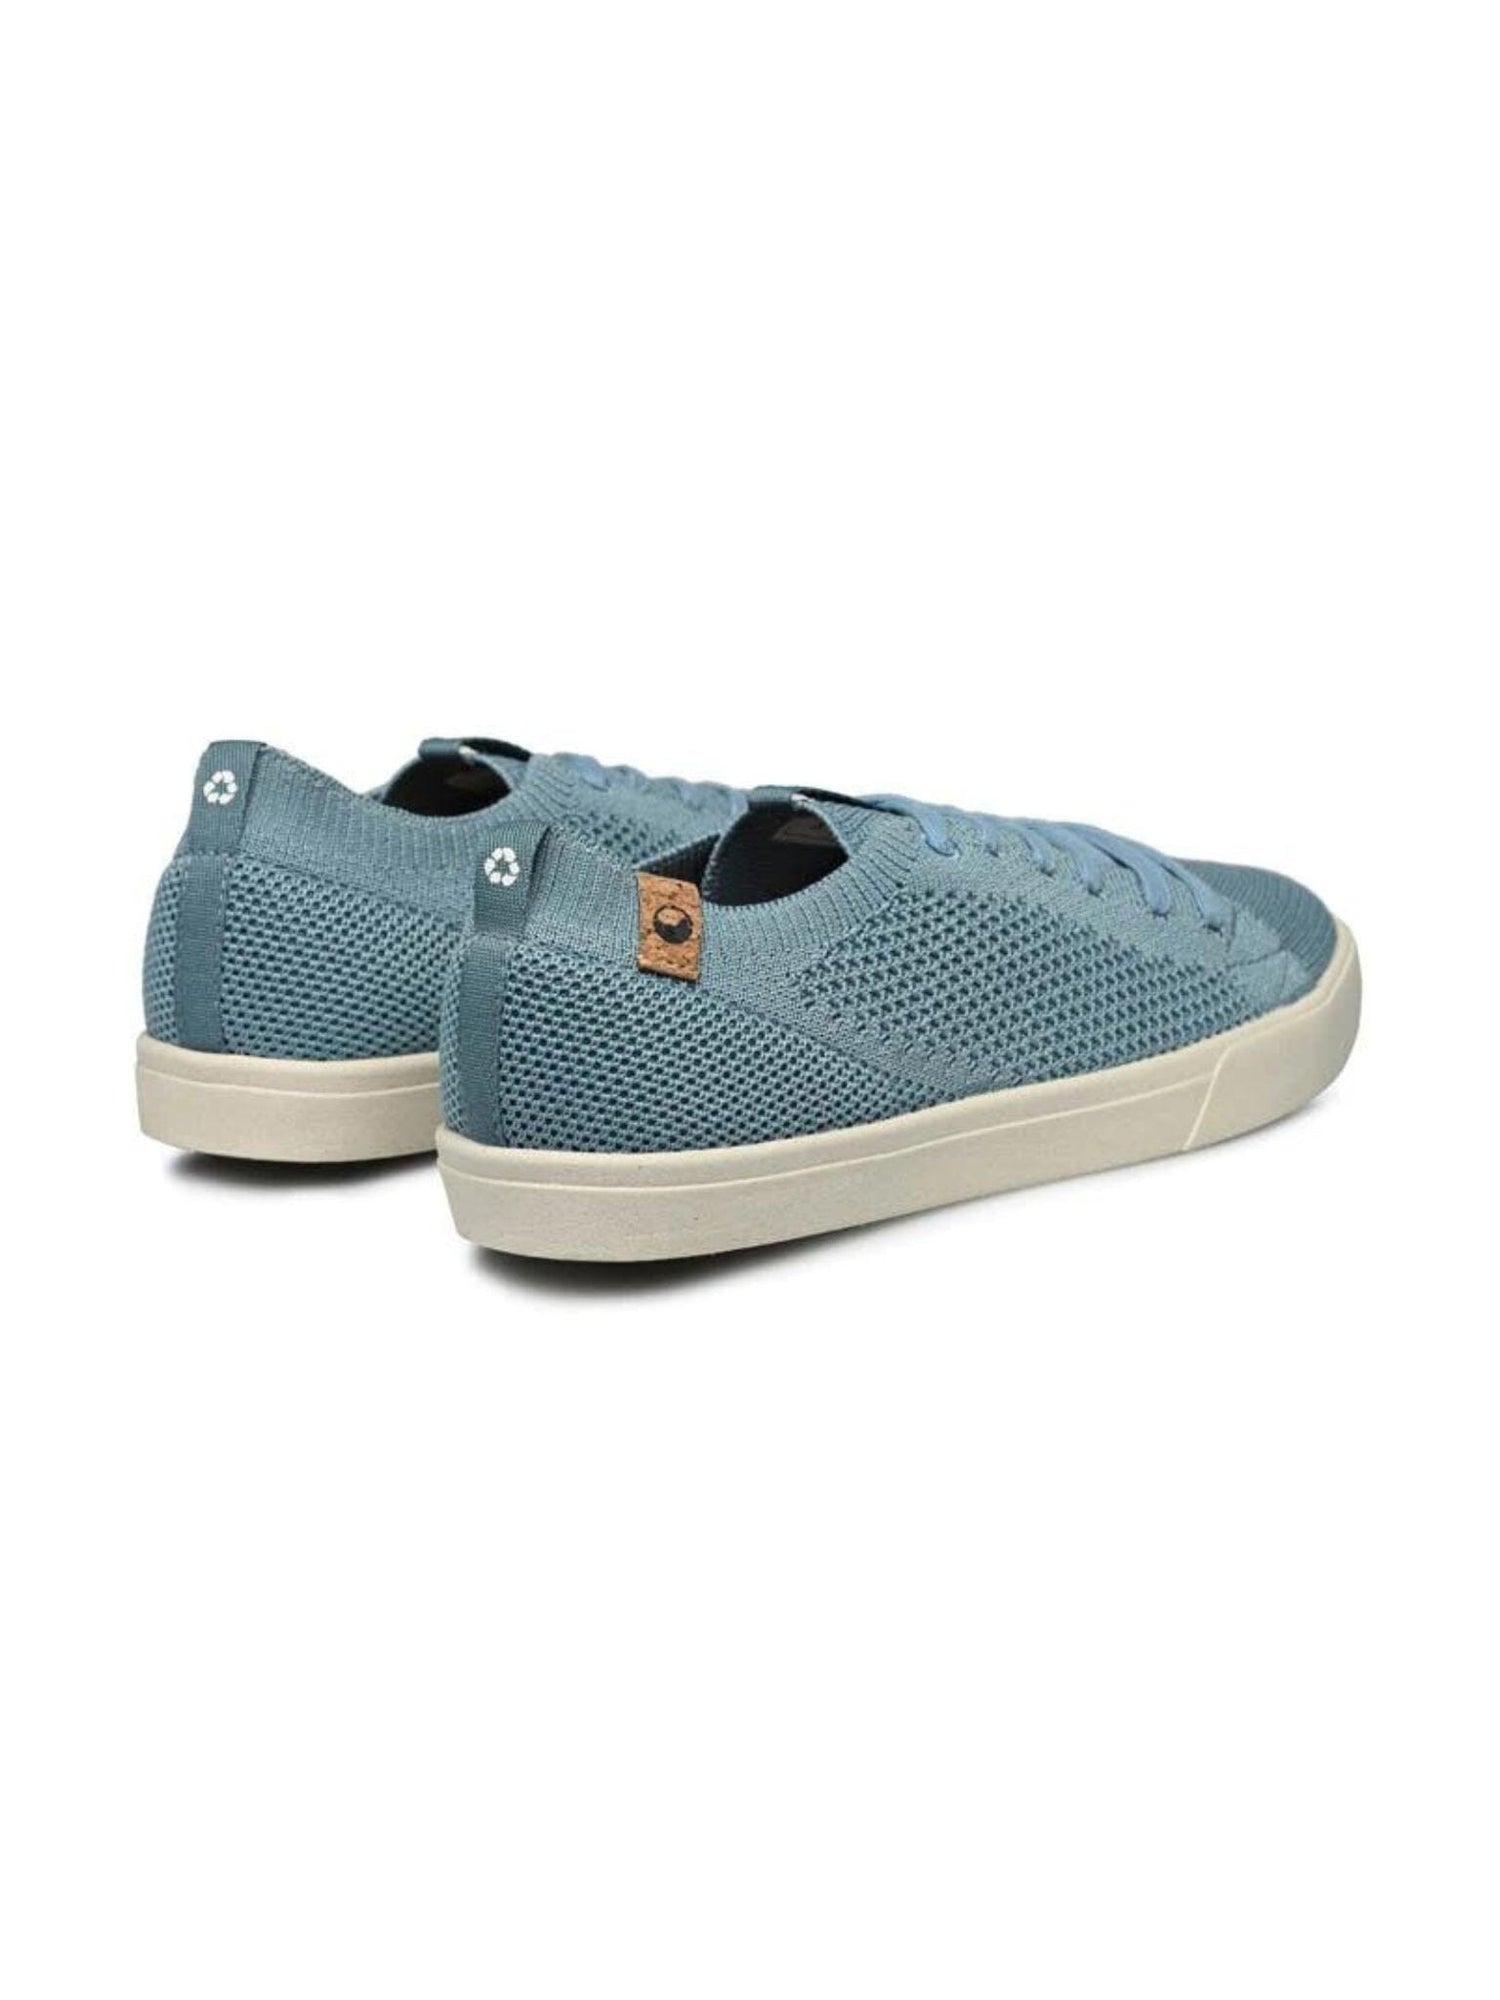 Saola W's Cannon Knit - Recycled PET Smoke Blue Shoes